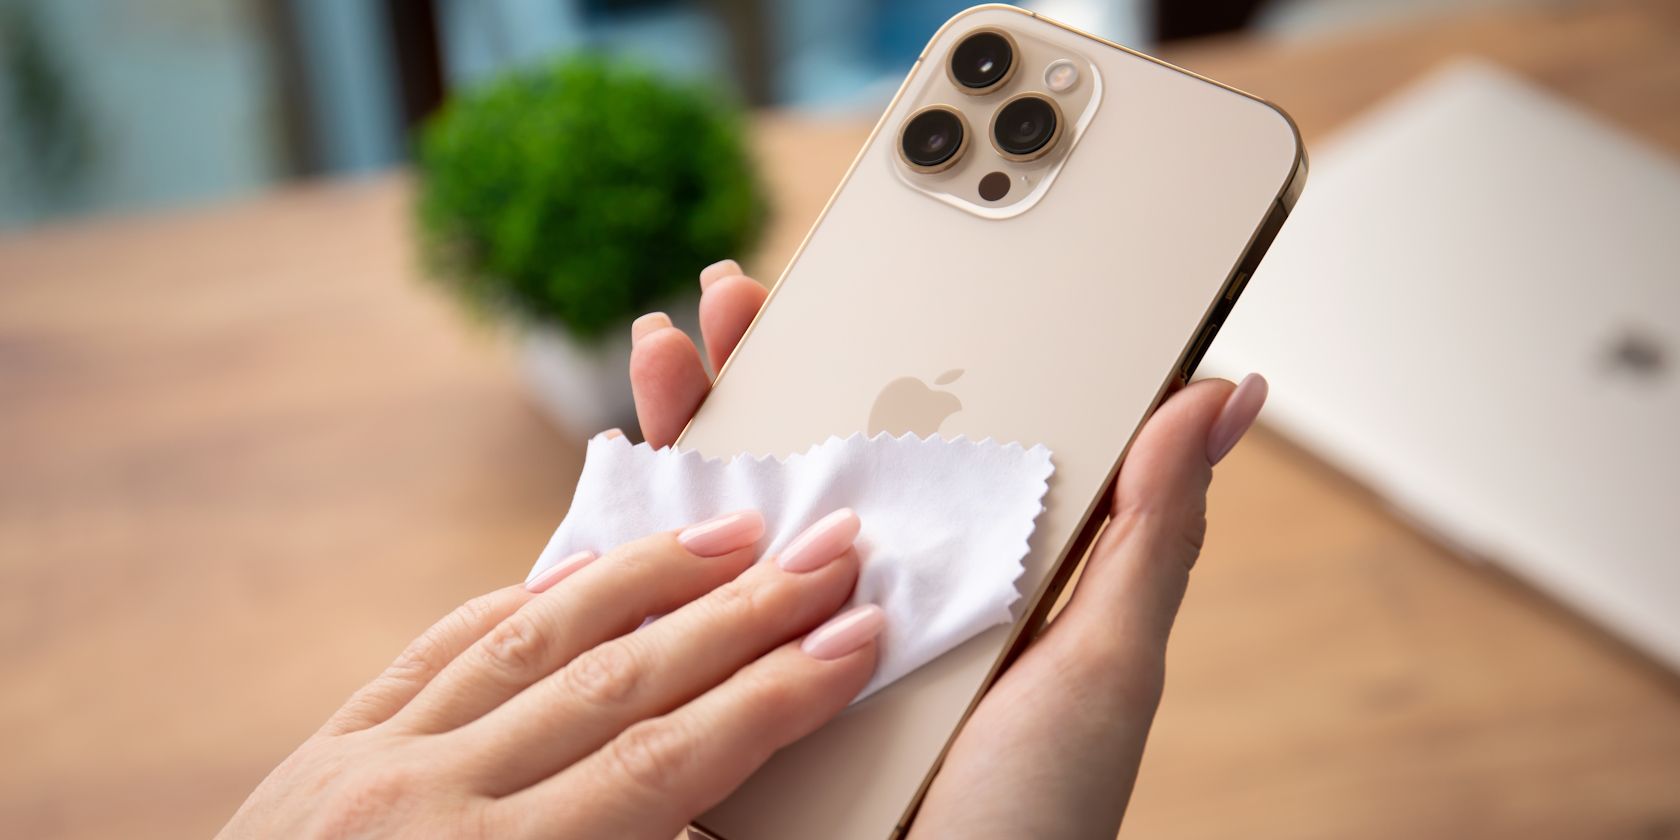 A woman cleaning an iPhone with a microfiber cloth